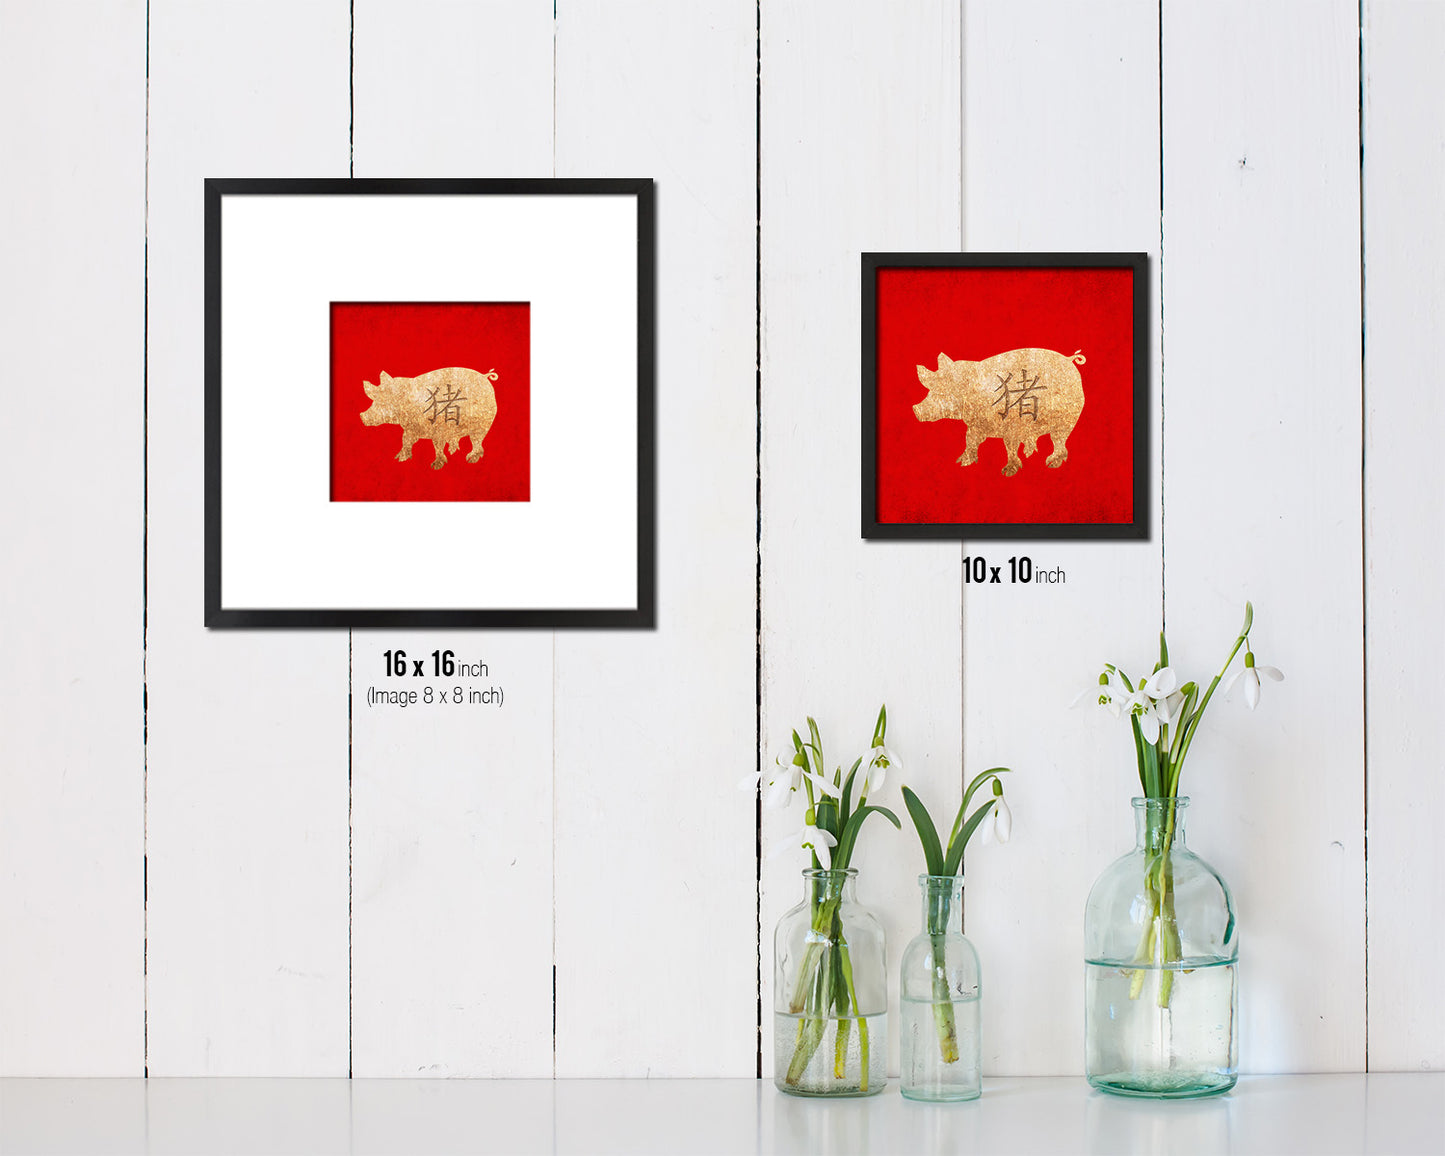 Pig Chinese Zodiac Character Wood Framed Print Wall Art Decor Gifts, Red